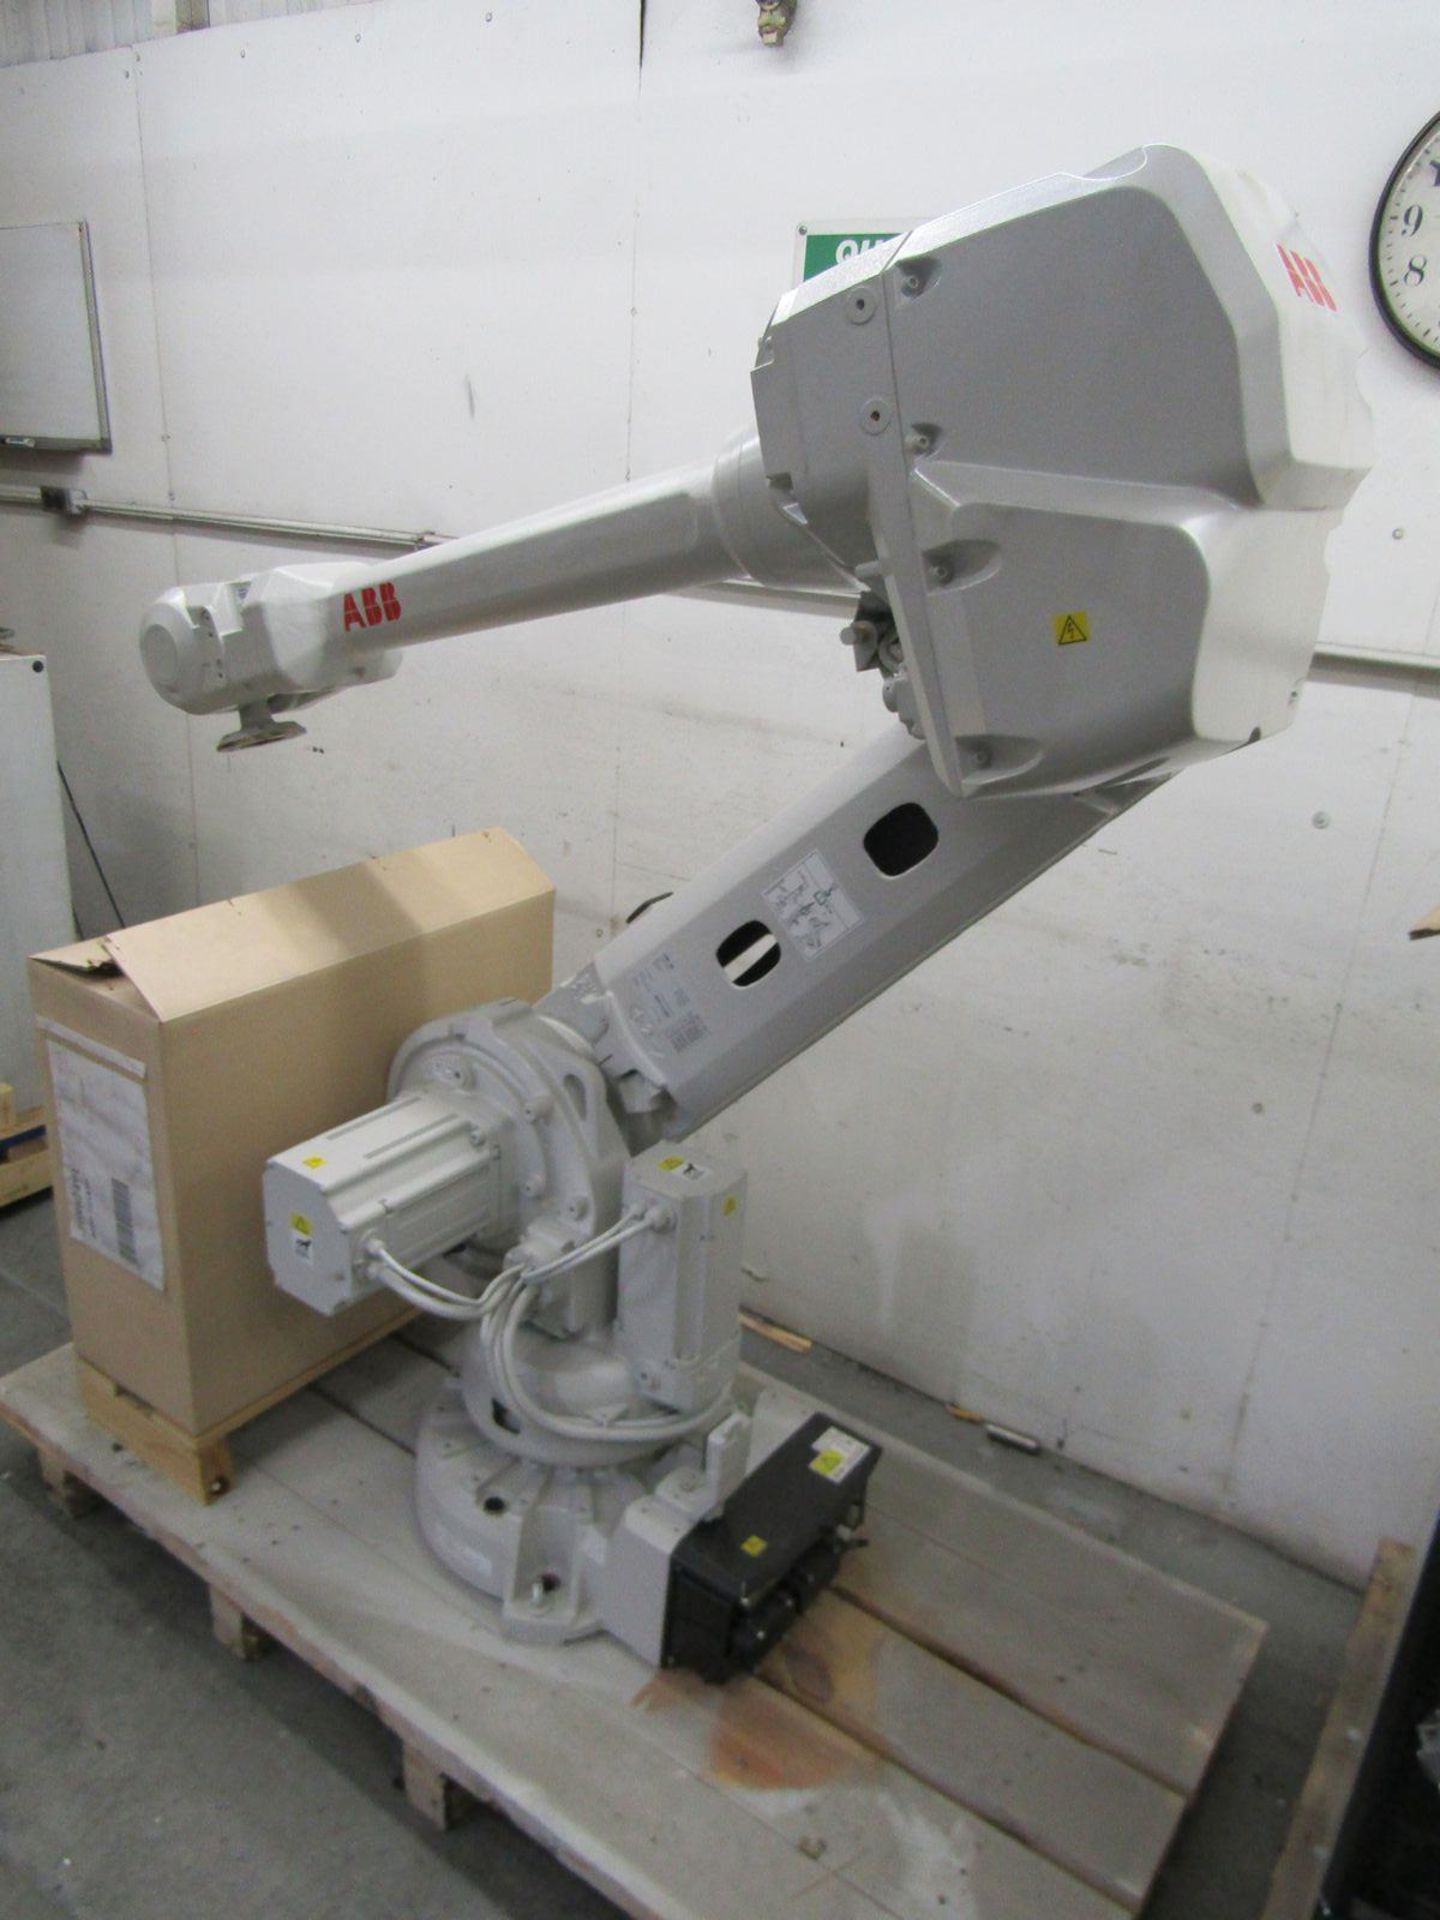 ABB 1,000 kG Load Capacity Model IRB4600 M2004 Robot, S/N: 4600-101899 (2014); with ABB Type IRC5 - Image 2 of 6